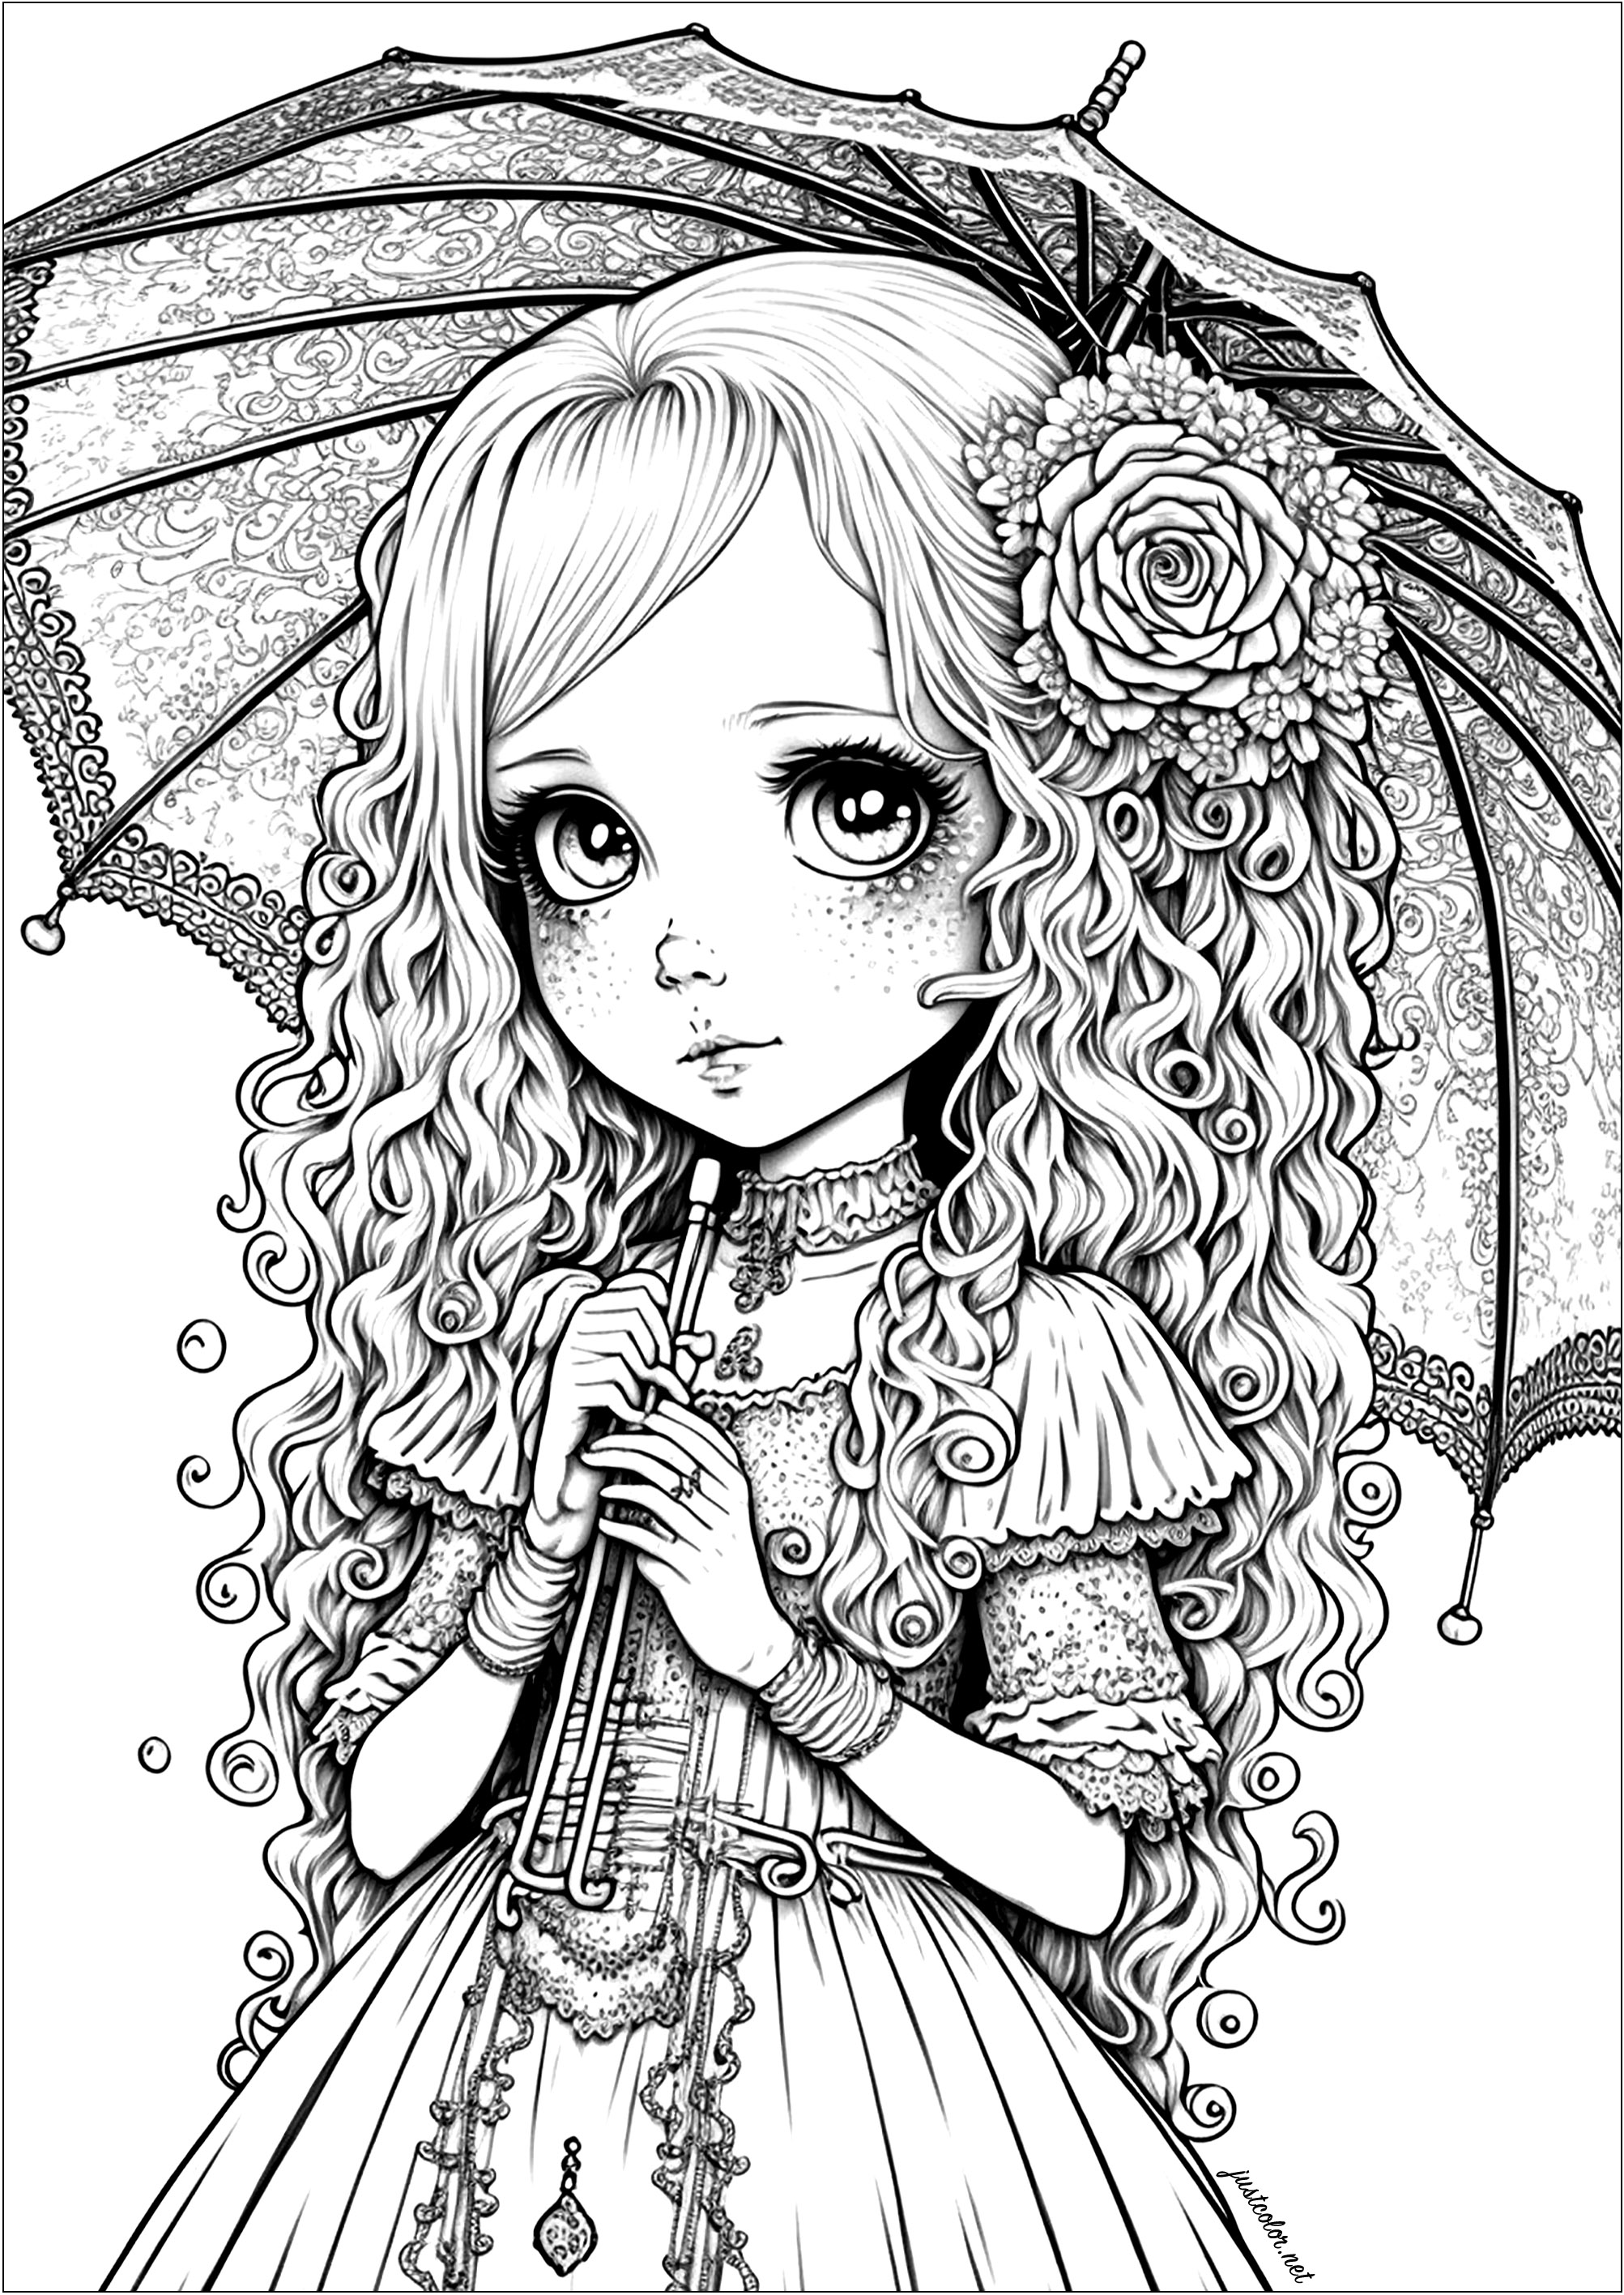 A pretty coloring book of a beautifully drawn young girl, in the Anime/Manga style. This coloring page is a real treat for the eyes! A beautiful drawing of a young girl, beautifully drawn in an animated / manga style. You can give free rein to your imagination and create a unique, personal coloring page.